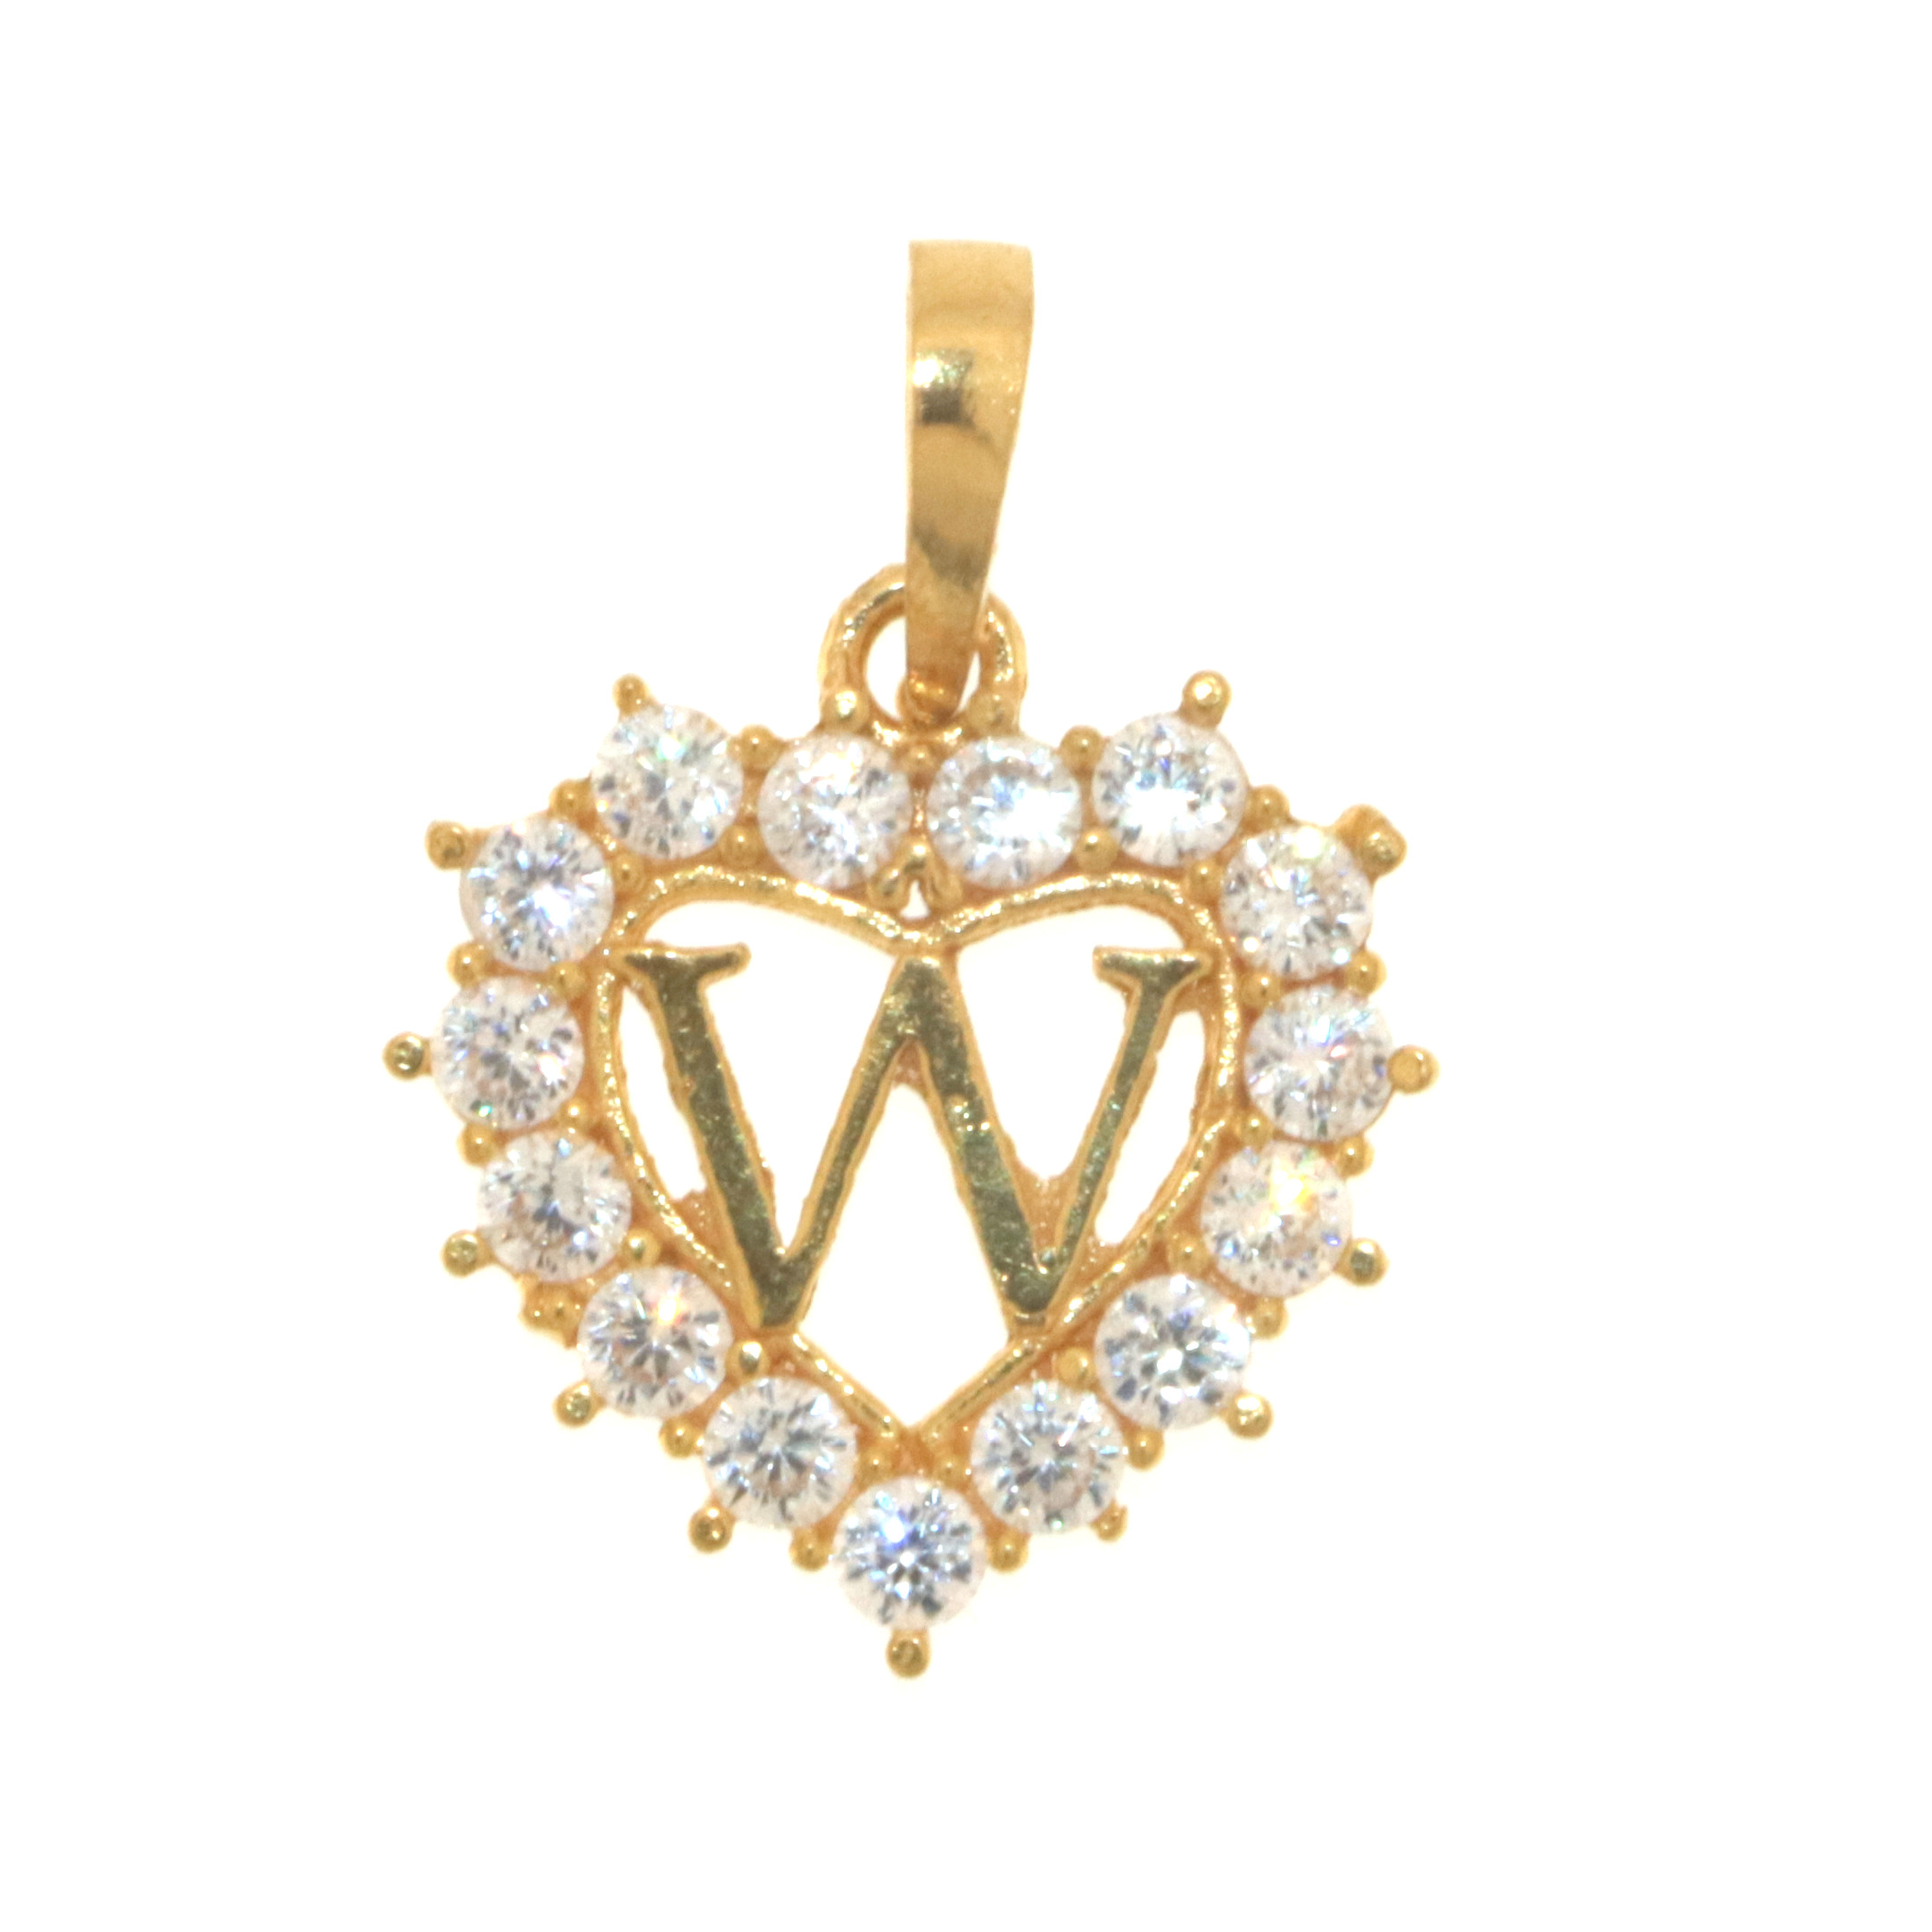 22ct Real Gold Asian/Indian/Pakistani Style Heart 'W' Pendant